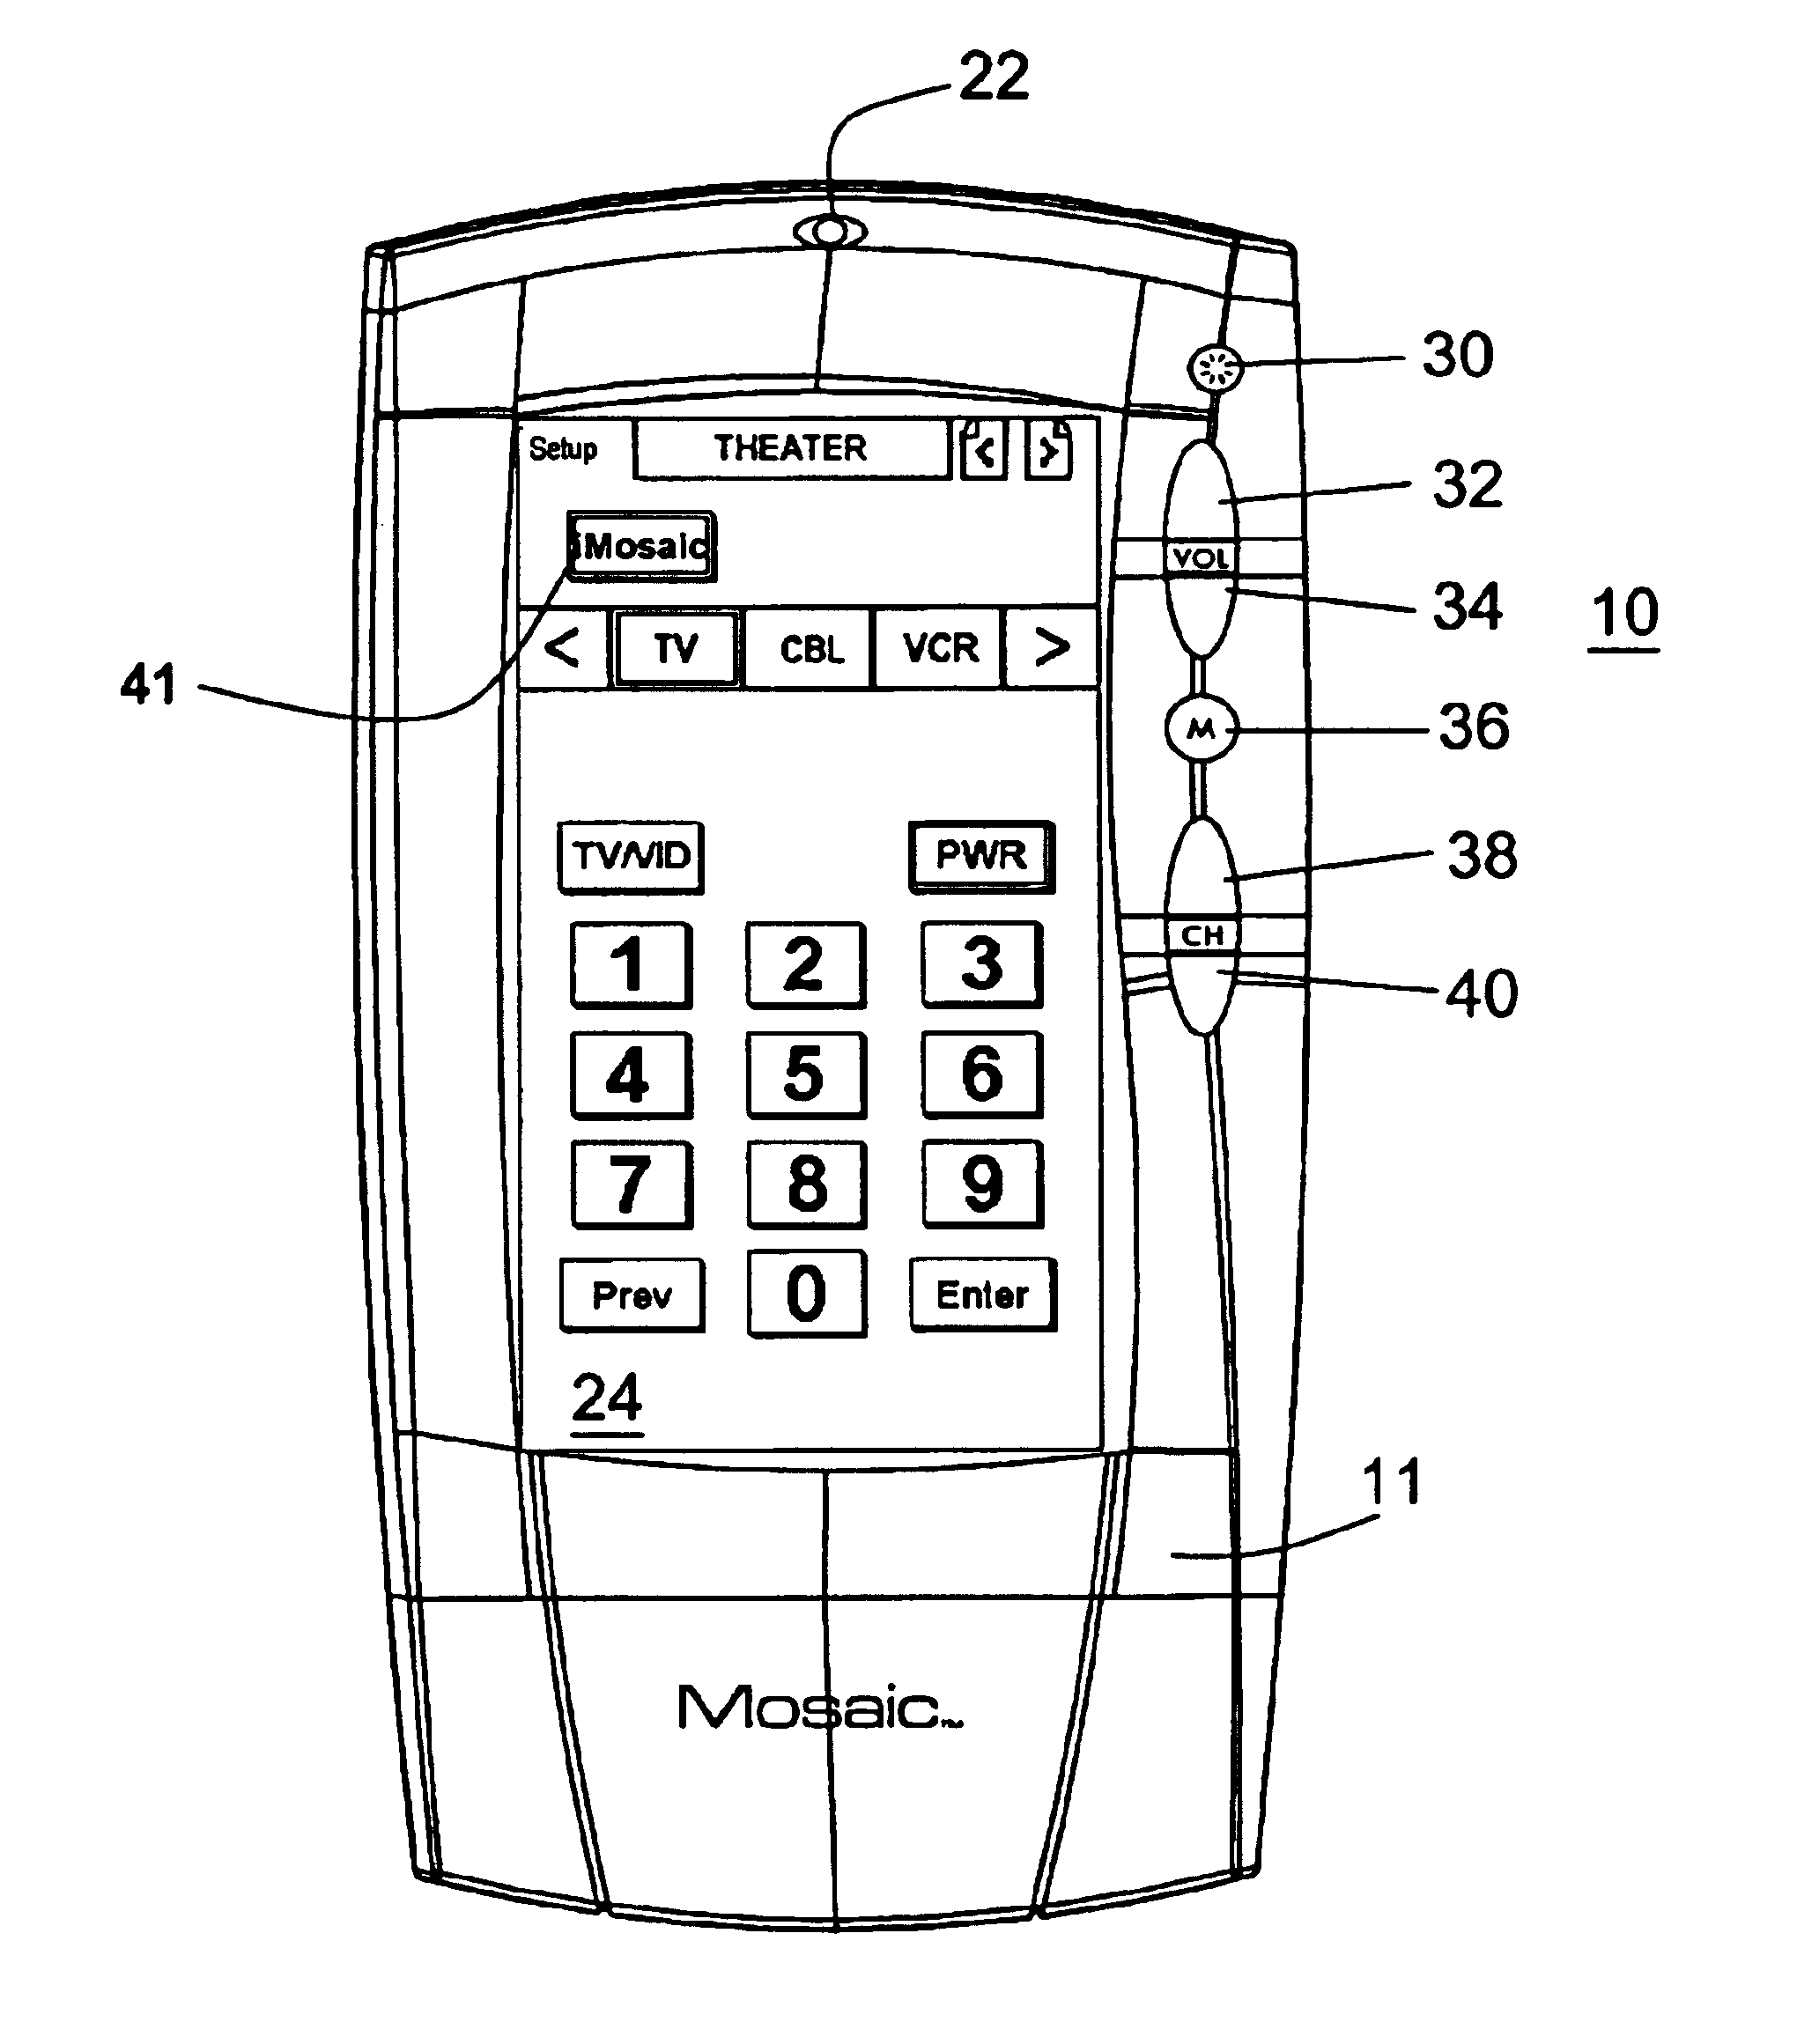 Universal remote control with display and printer